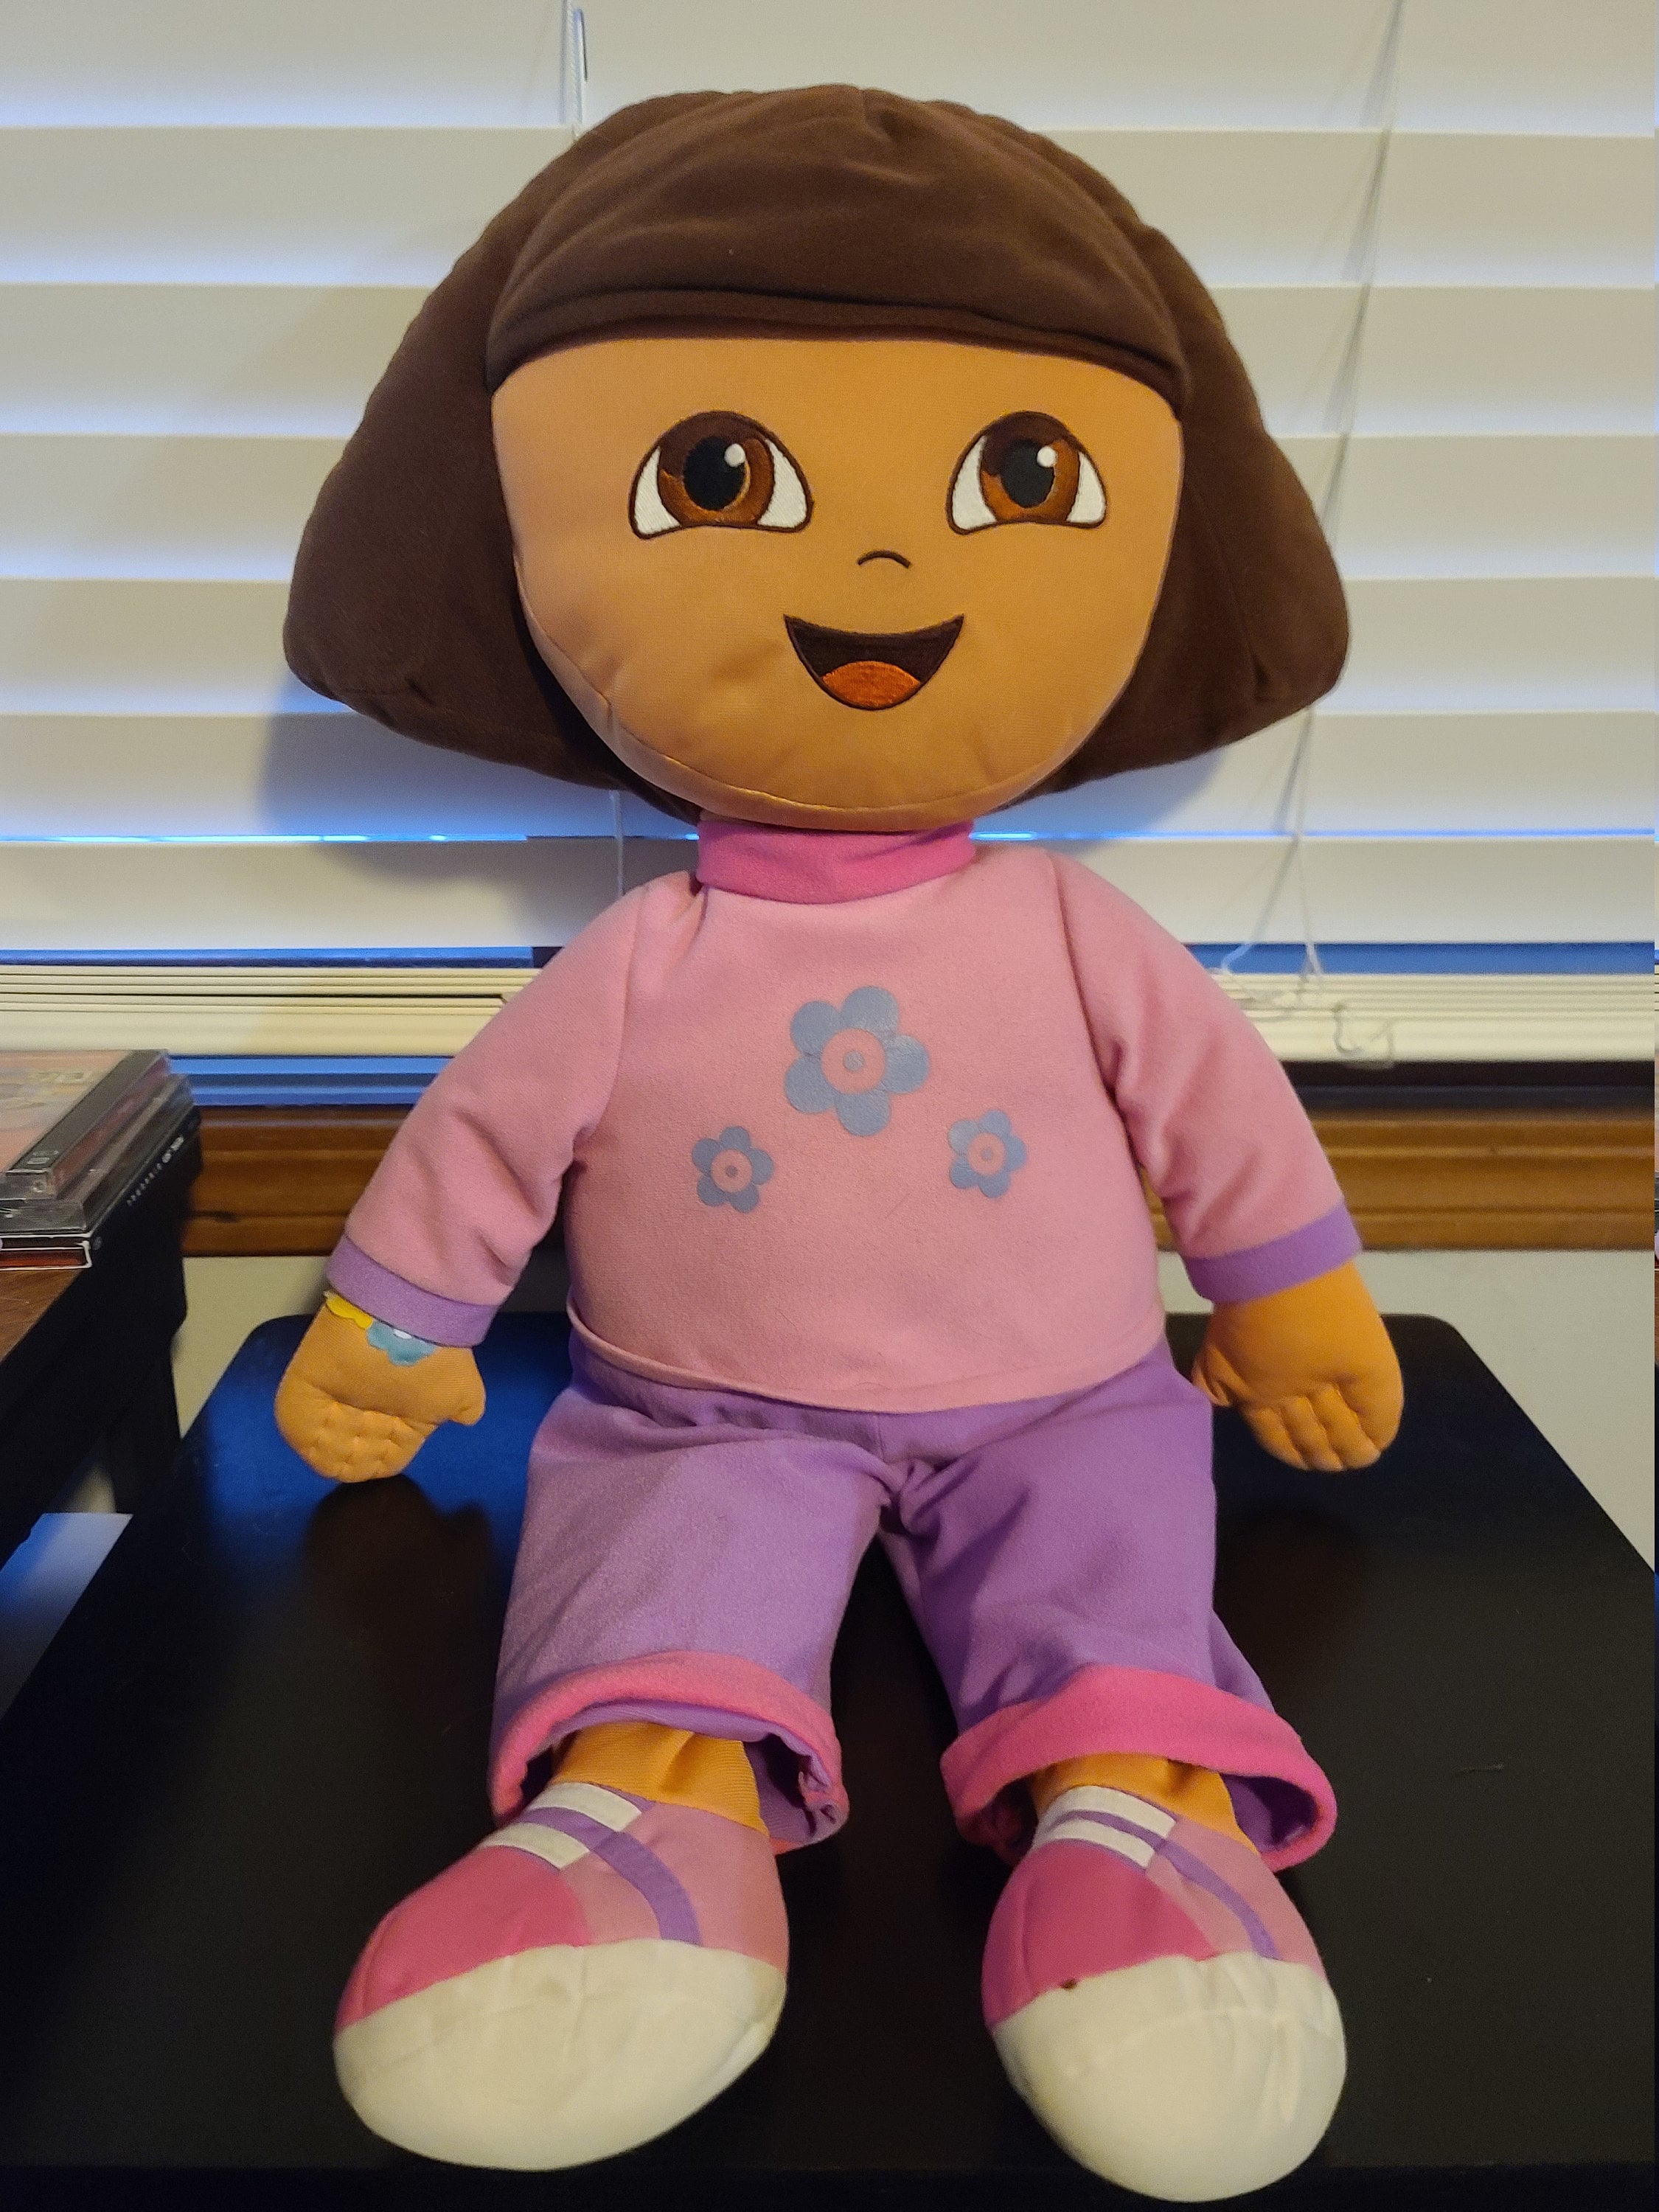 Meme of dora the explorer with a chad face